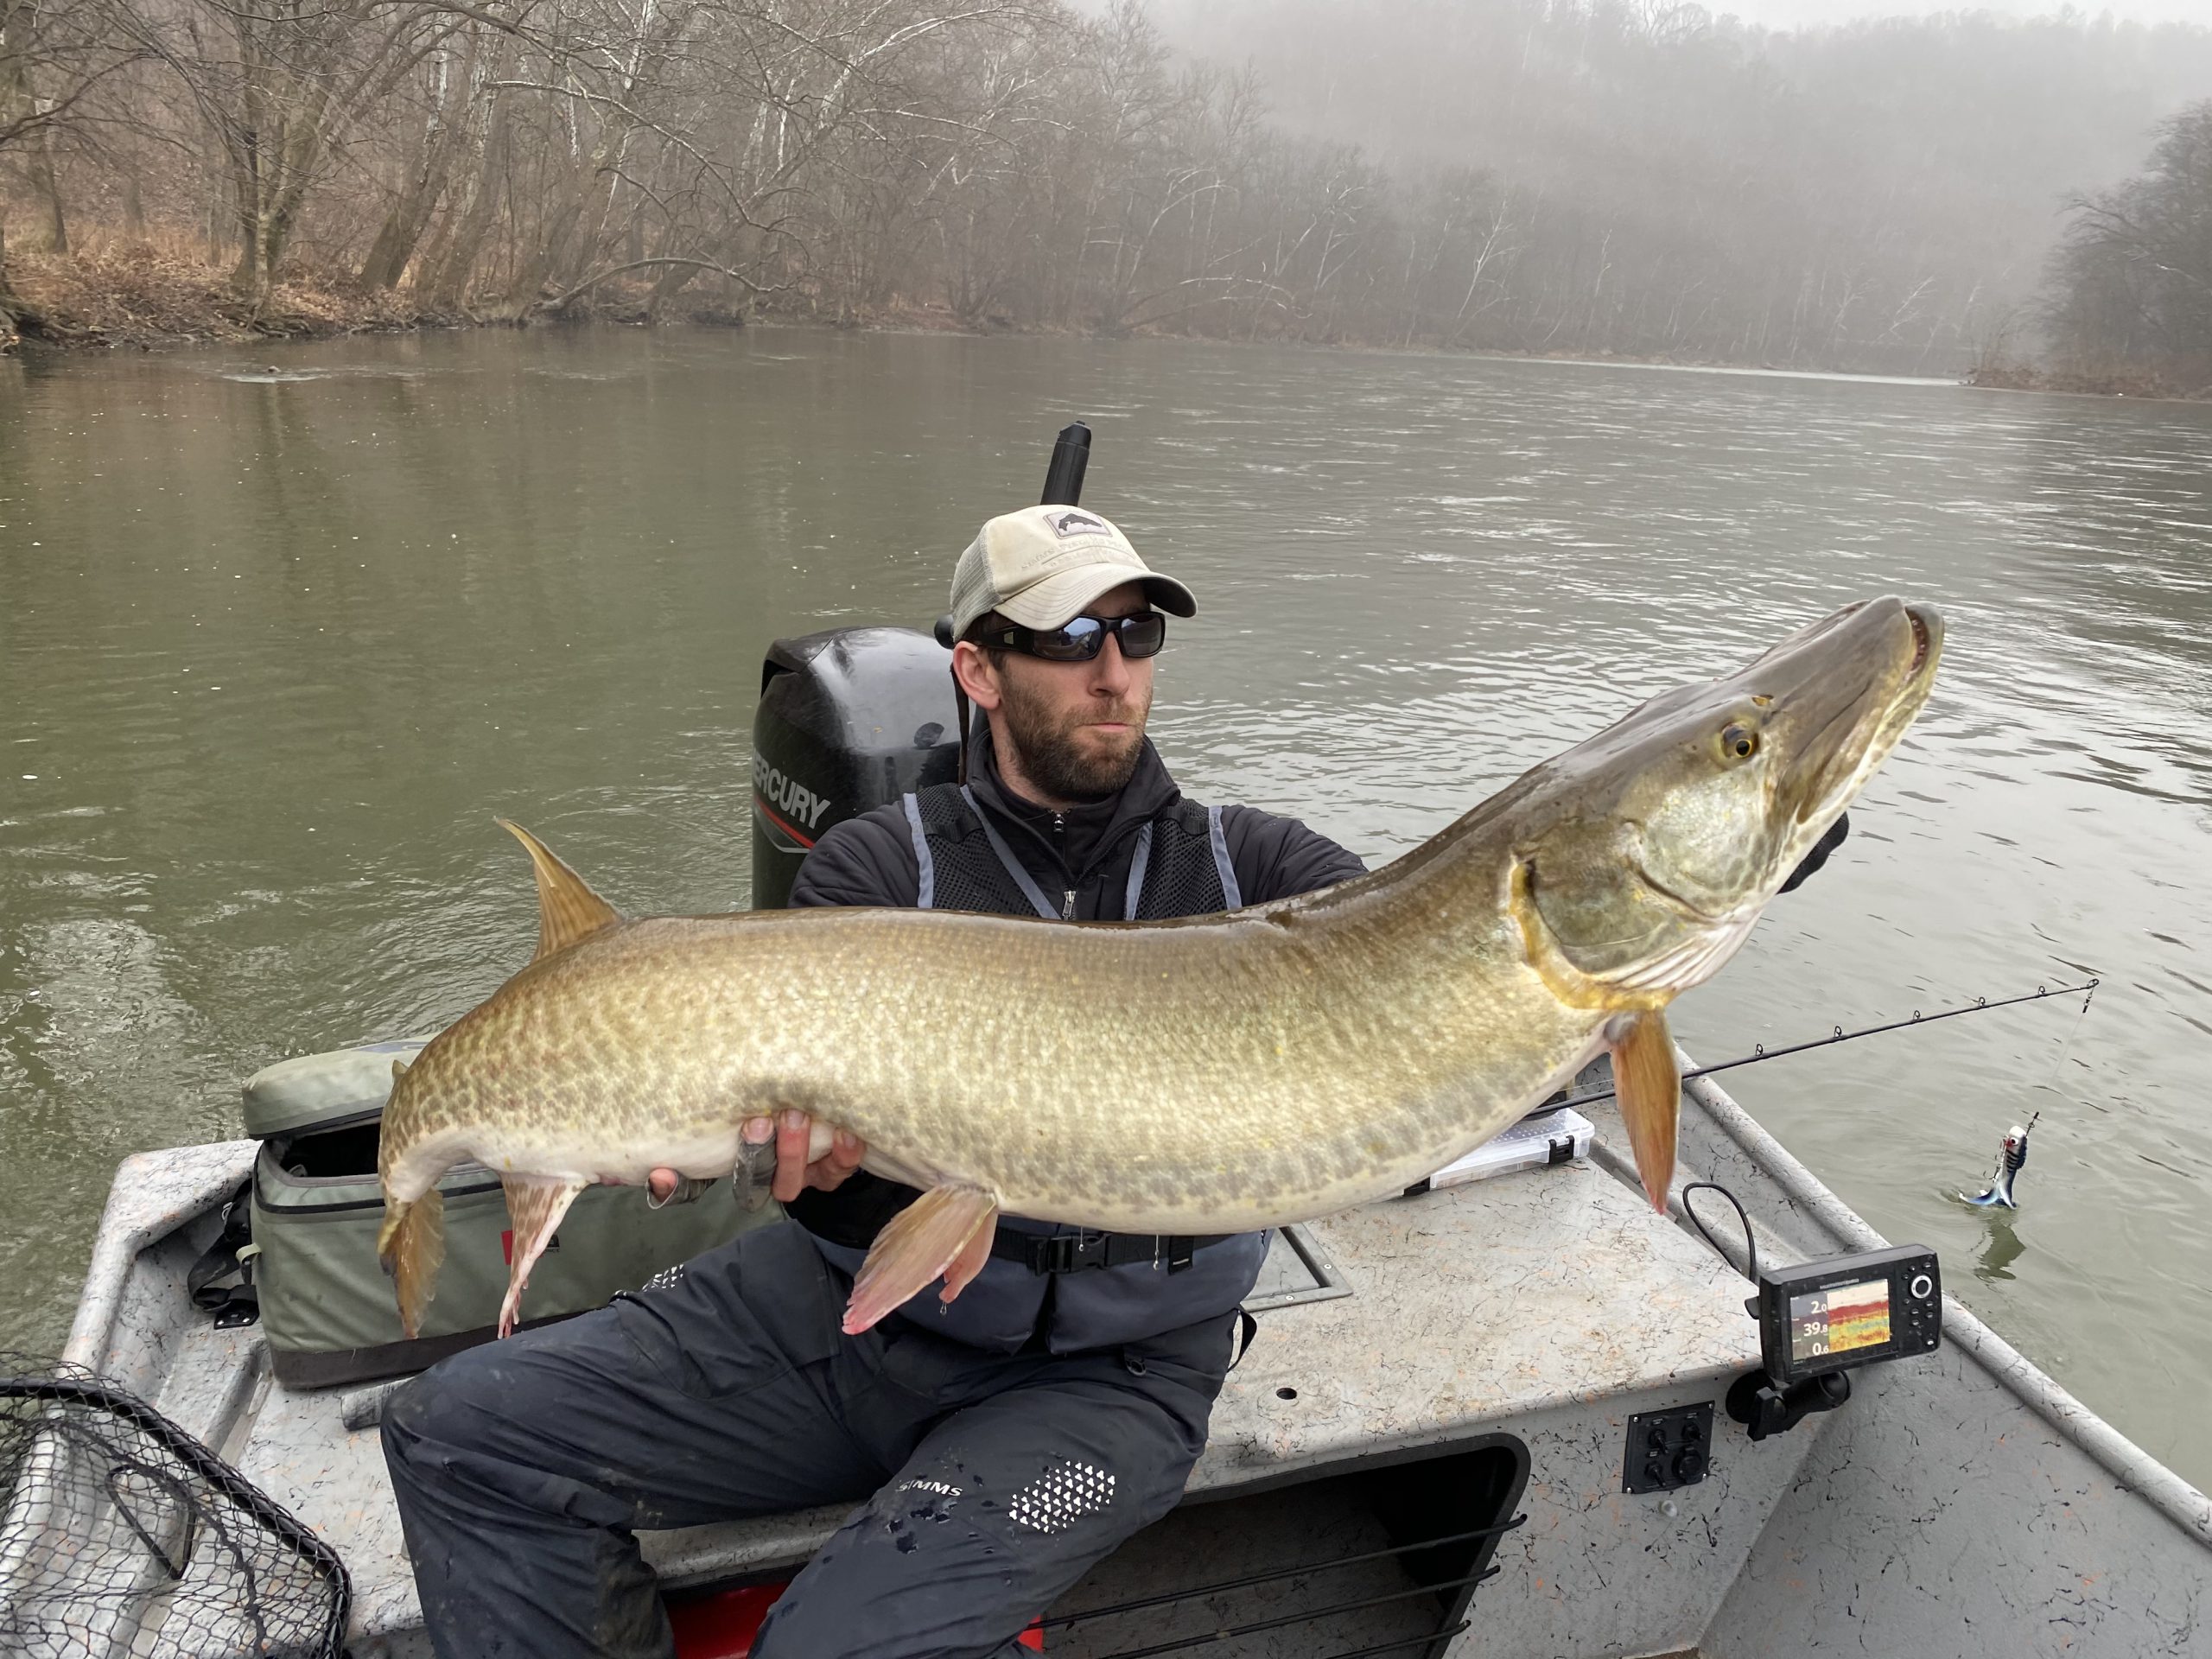 50.5 inch muskie on Yough River in Pittsburgh Pennsylvania on 12/28/2019